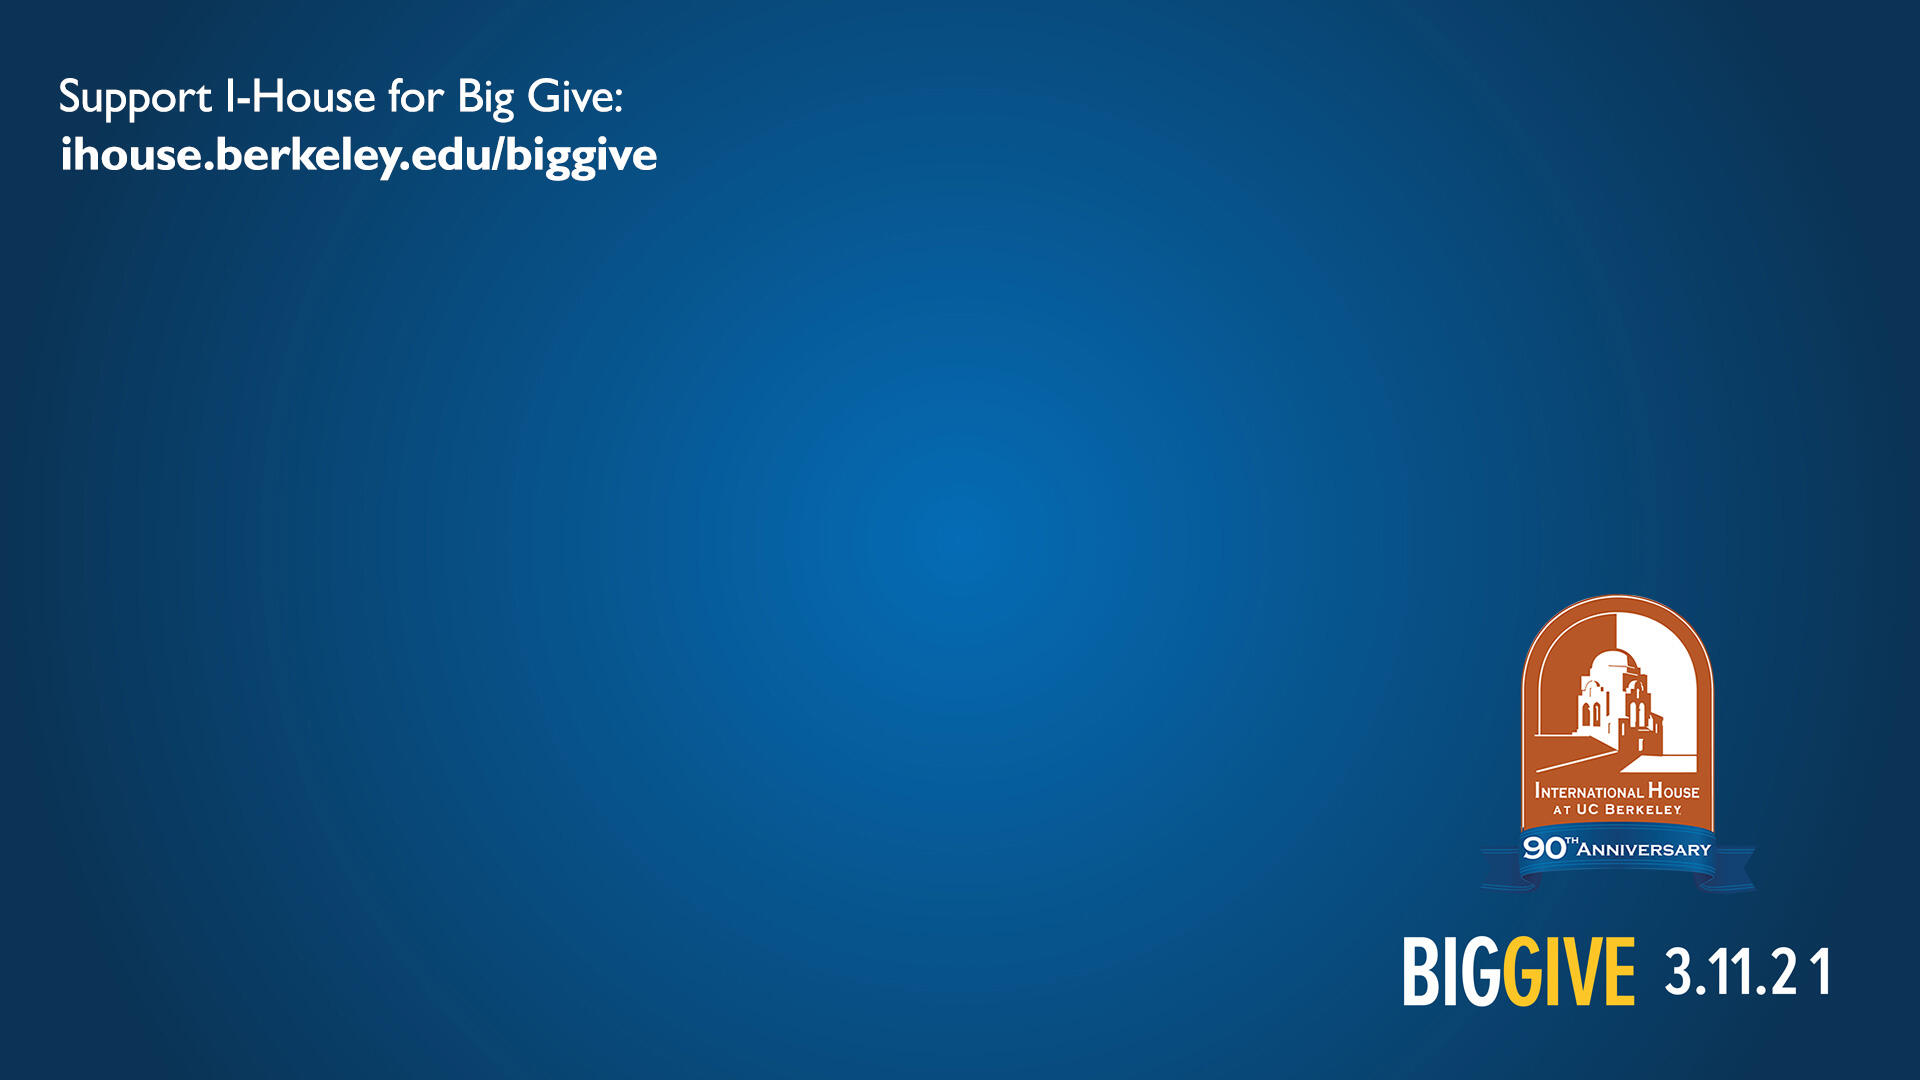 Support I-House for Big Give